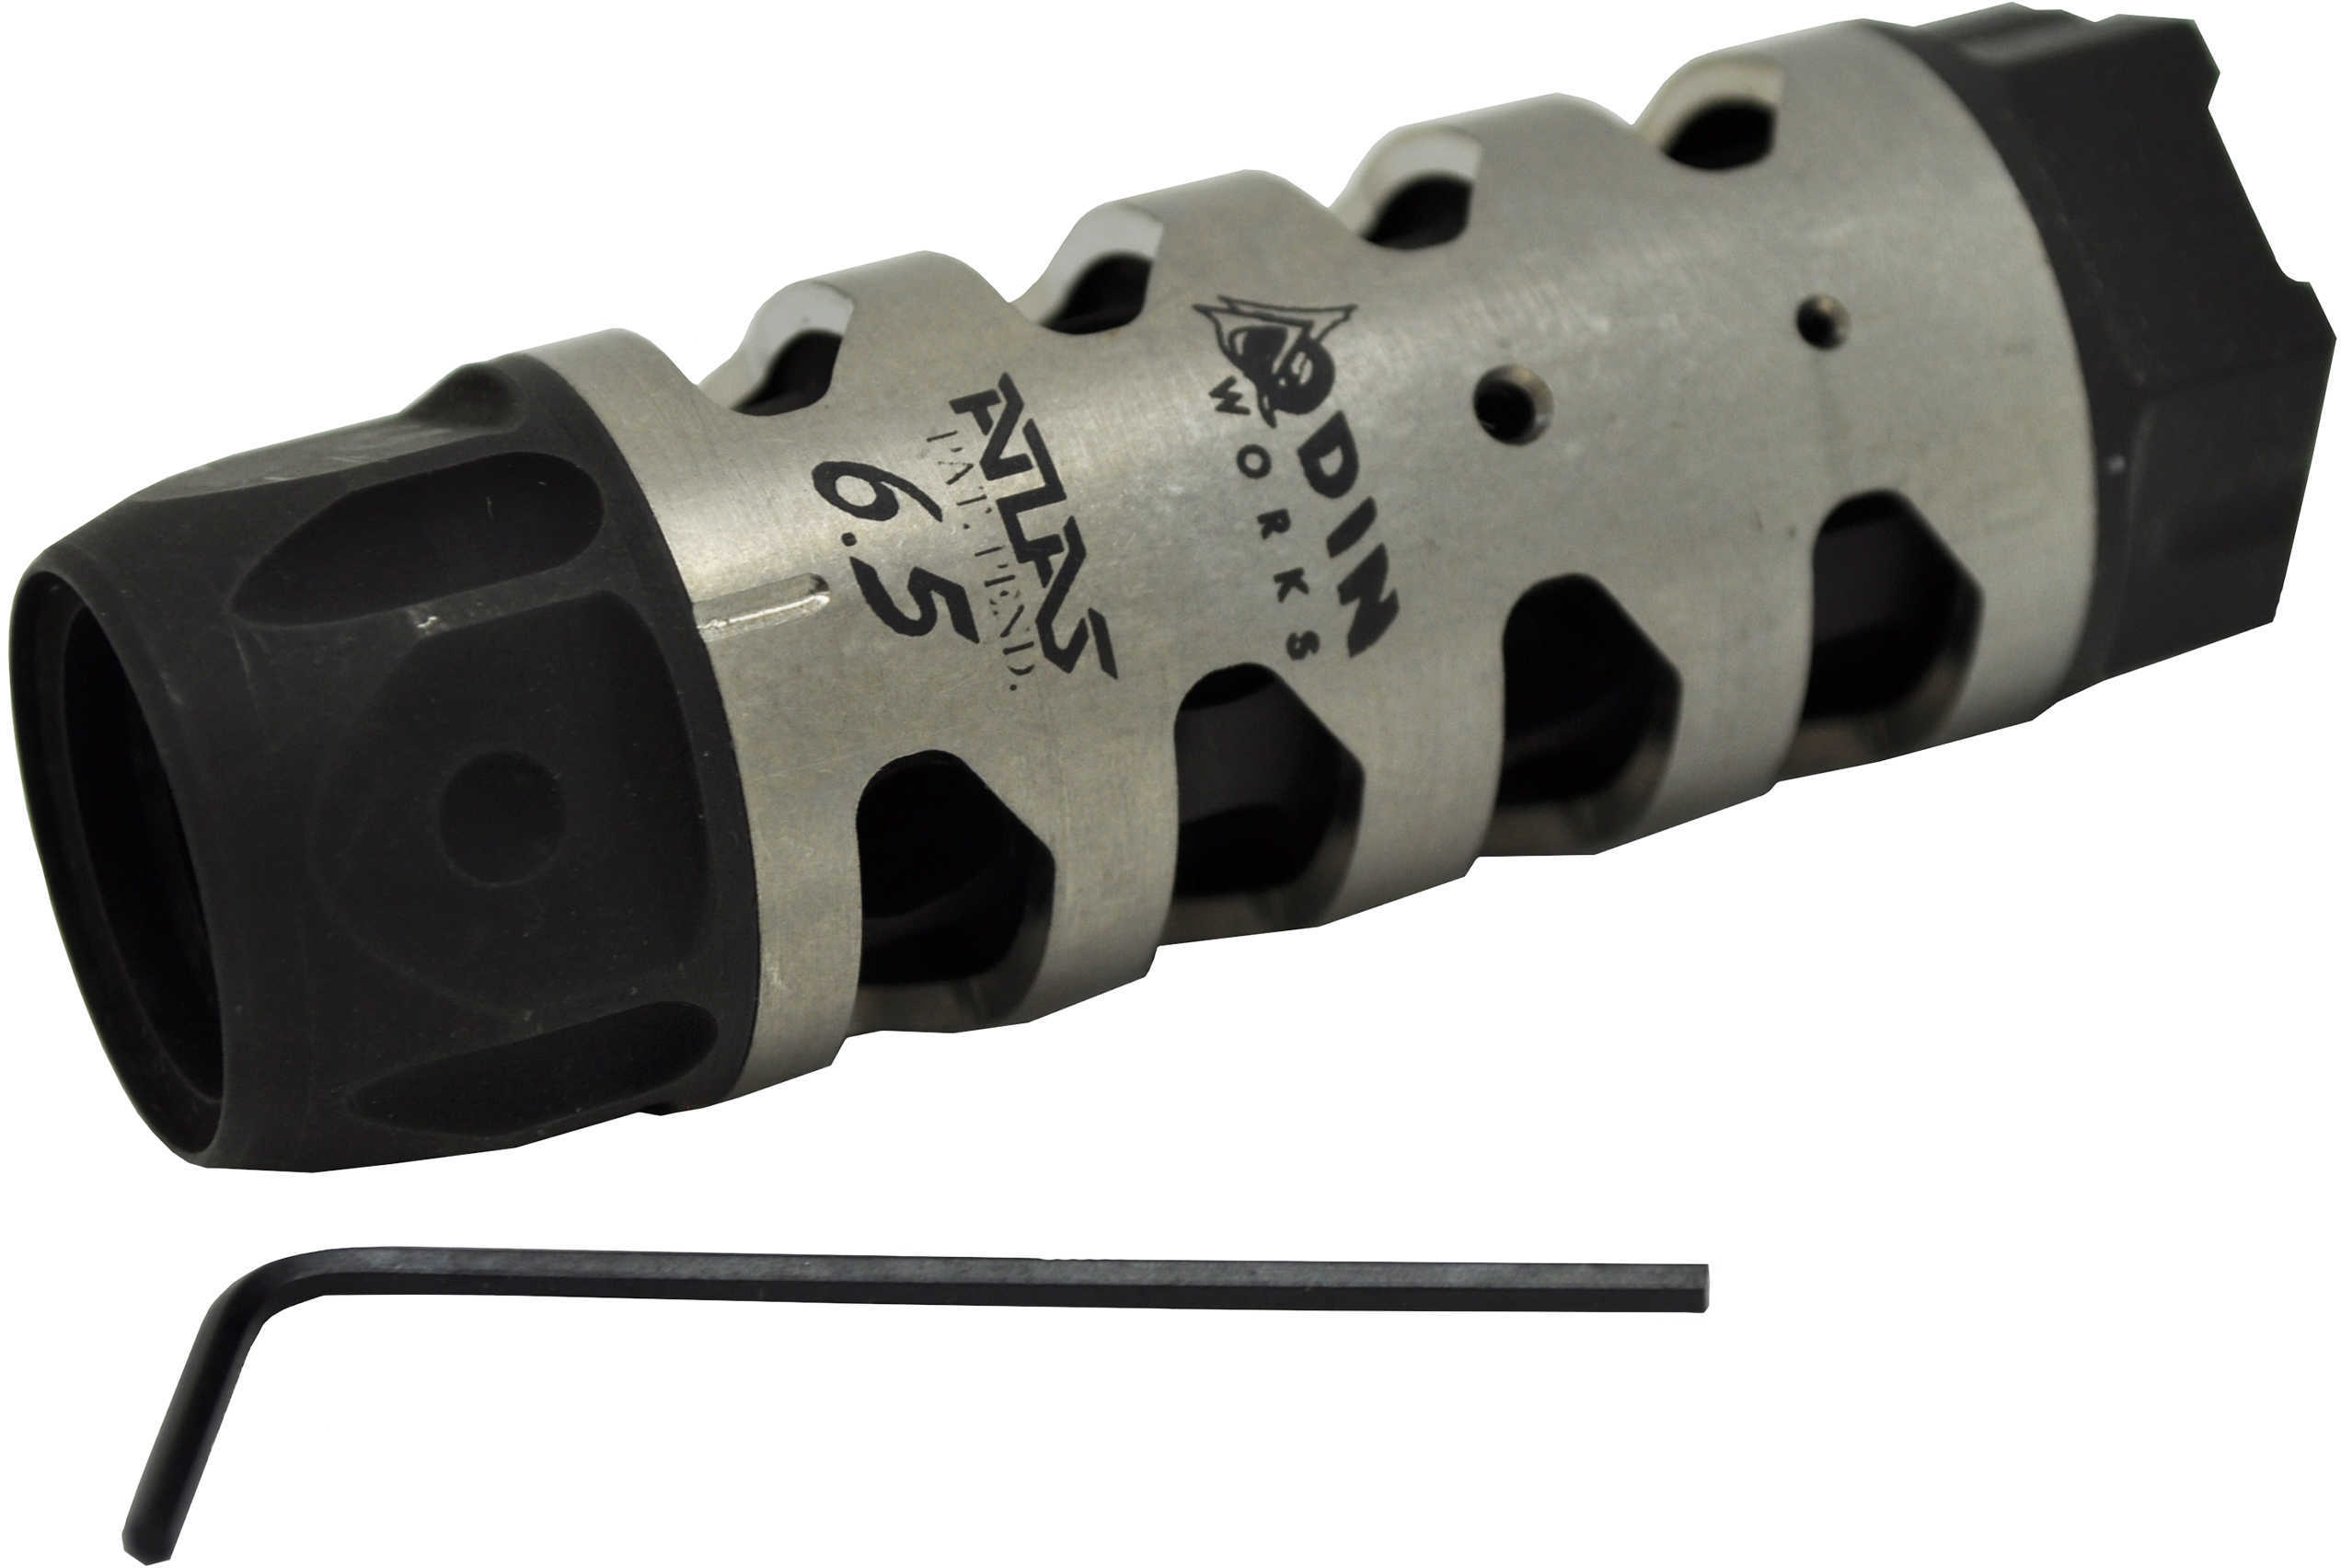 Odin Works Atlas 6.5 Muzzle Brake 6.5MM or 6MM Calibers 5/8-24 Threaded Stainless Steel MB-ATLAS-6.5